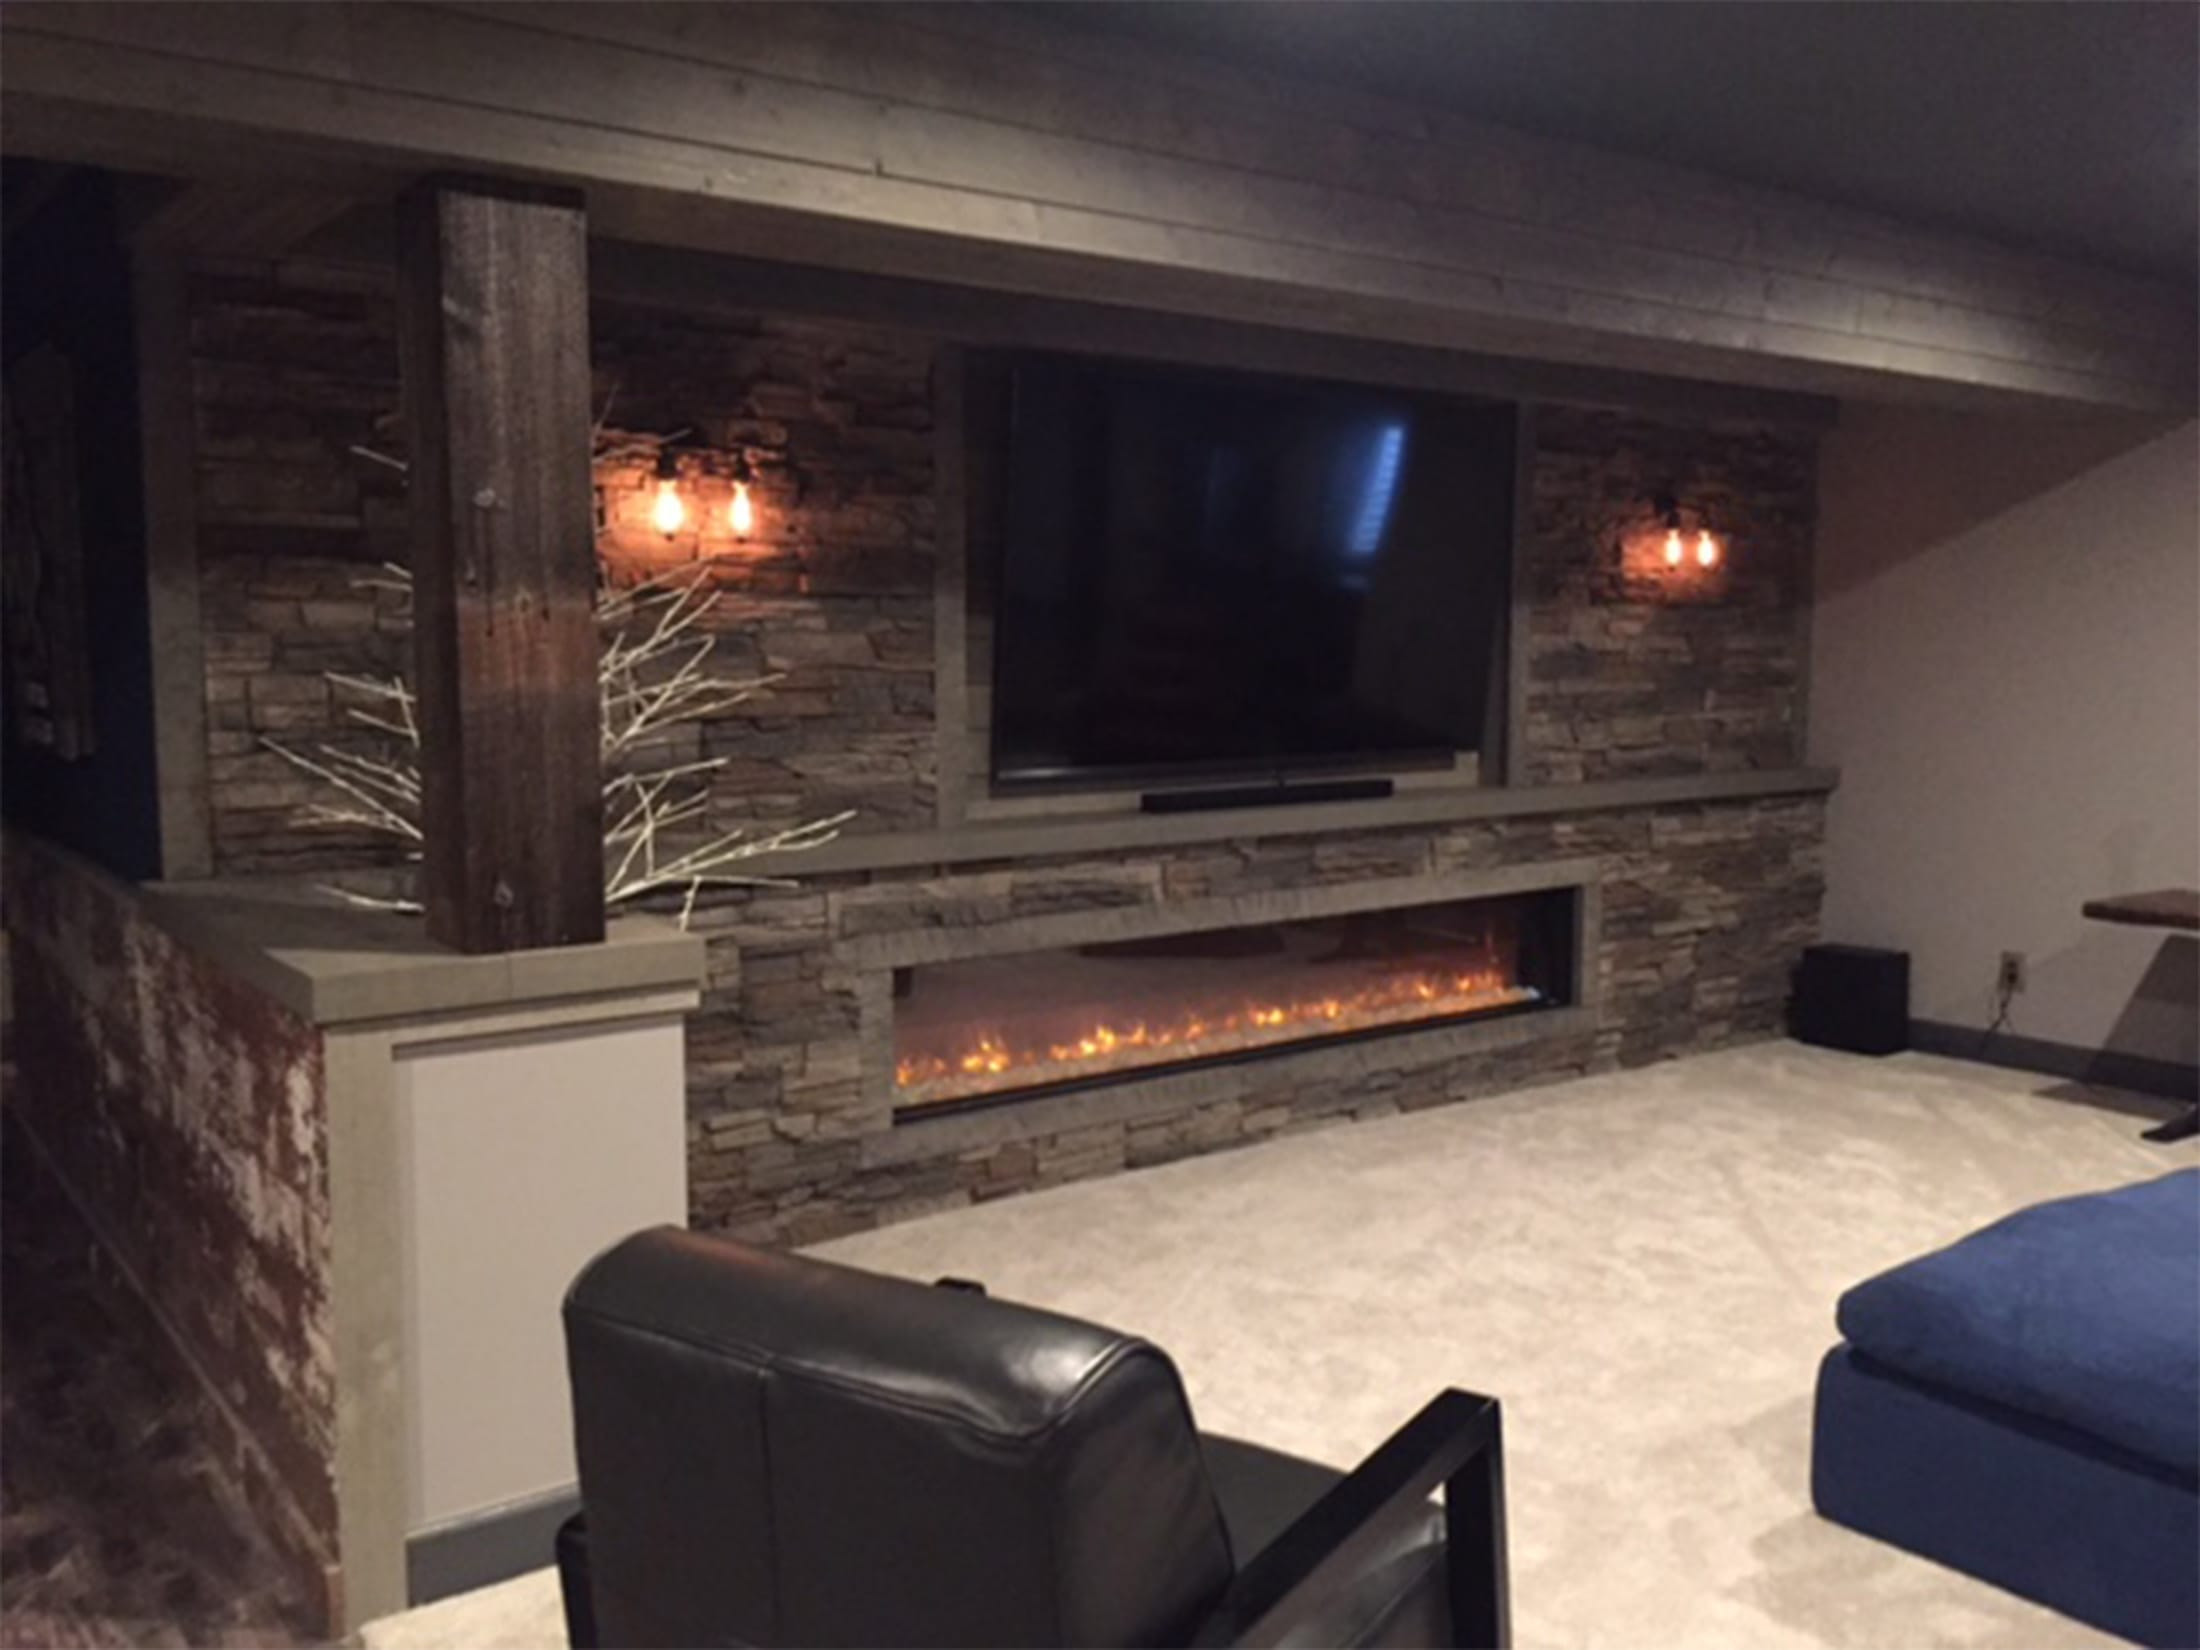 Stone Accent Wall Living Room
 Living Room Stone Accent Walls by Jimmy